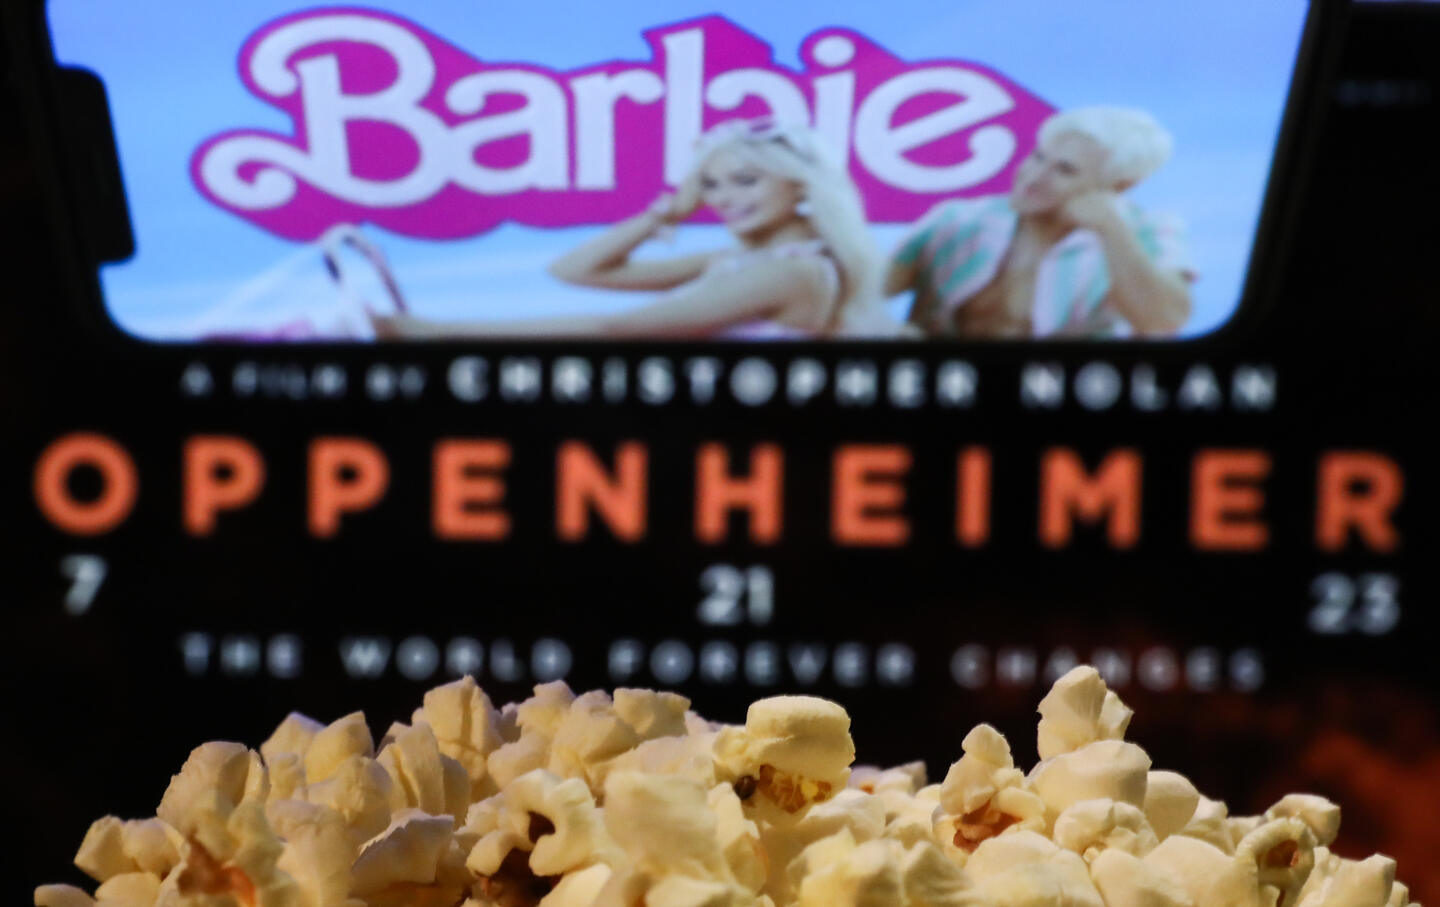 A bag of popcorn, Barbie website displayed on a phone screen and Oppenheimer poster displayed on a screen in the background are seen in this illustration photo taken on August 1, 2023.